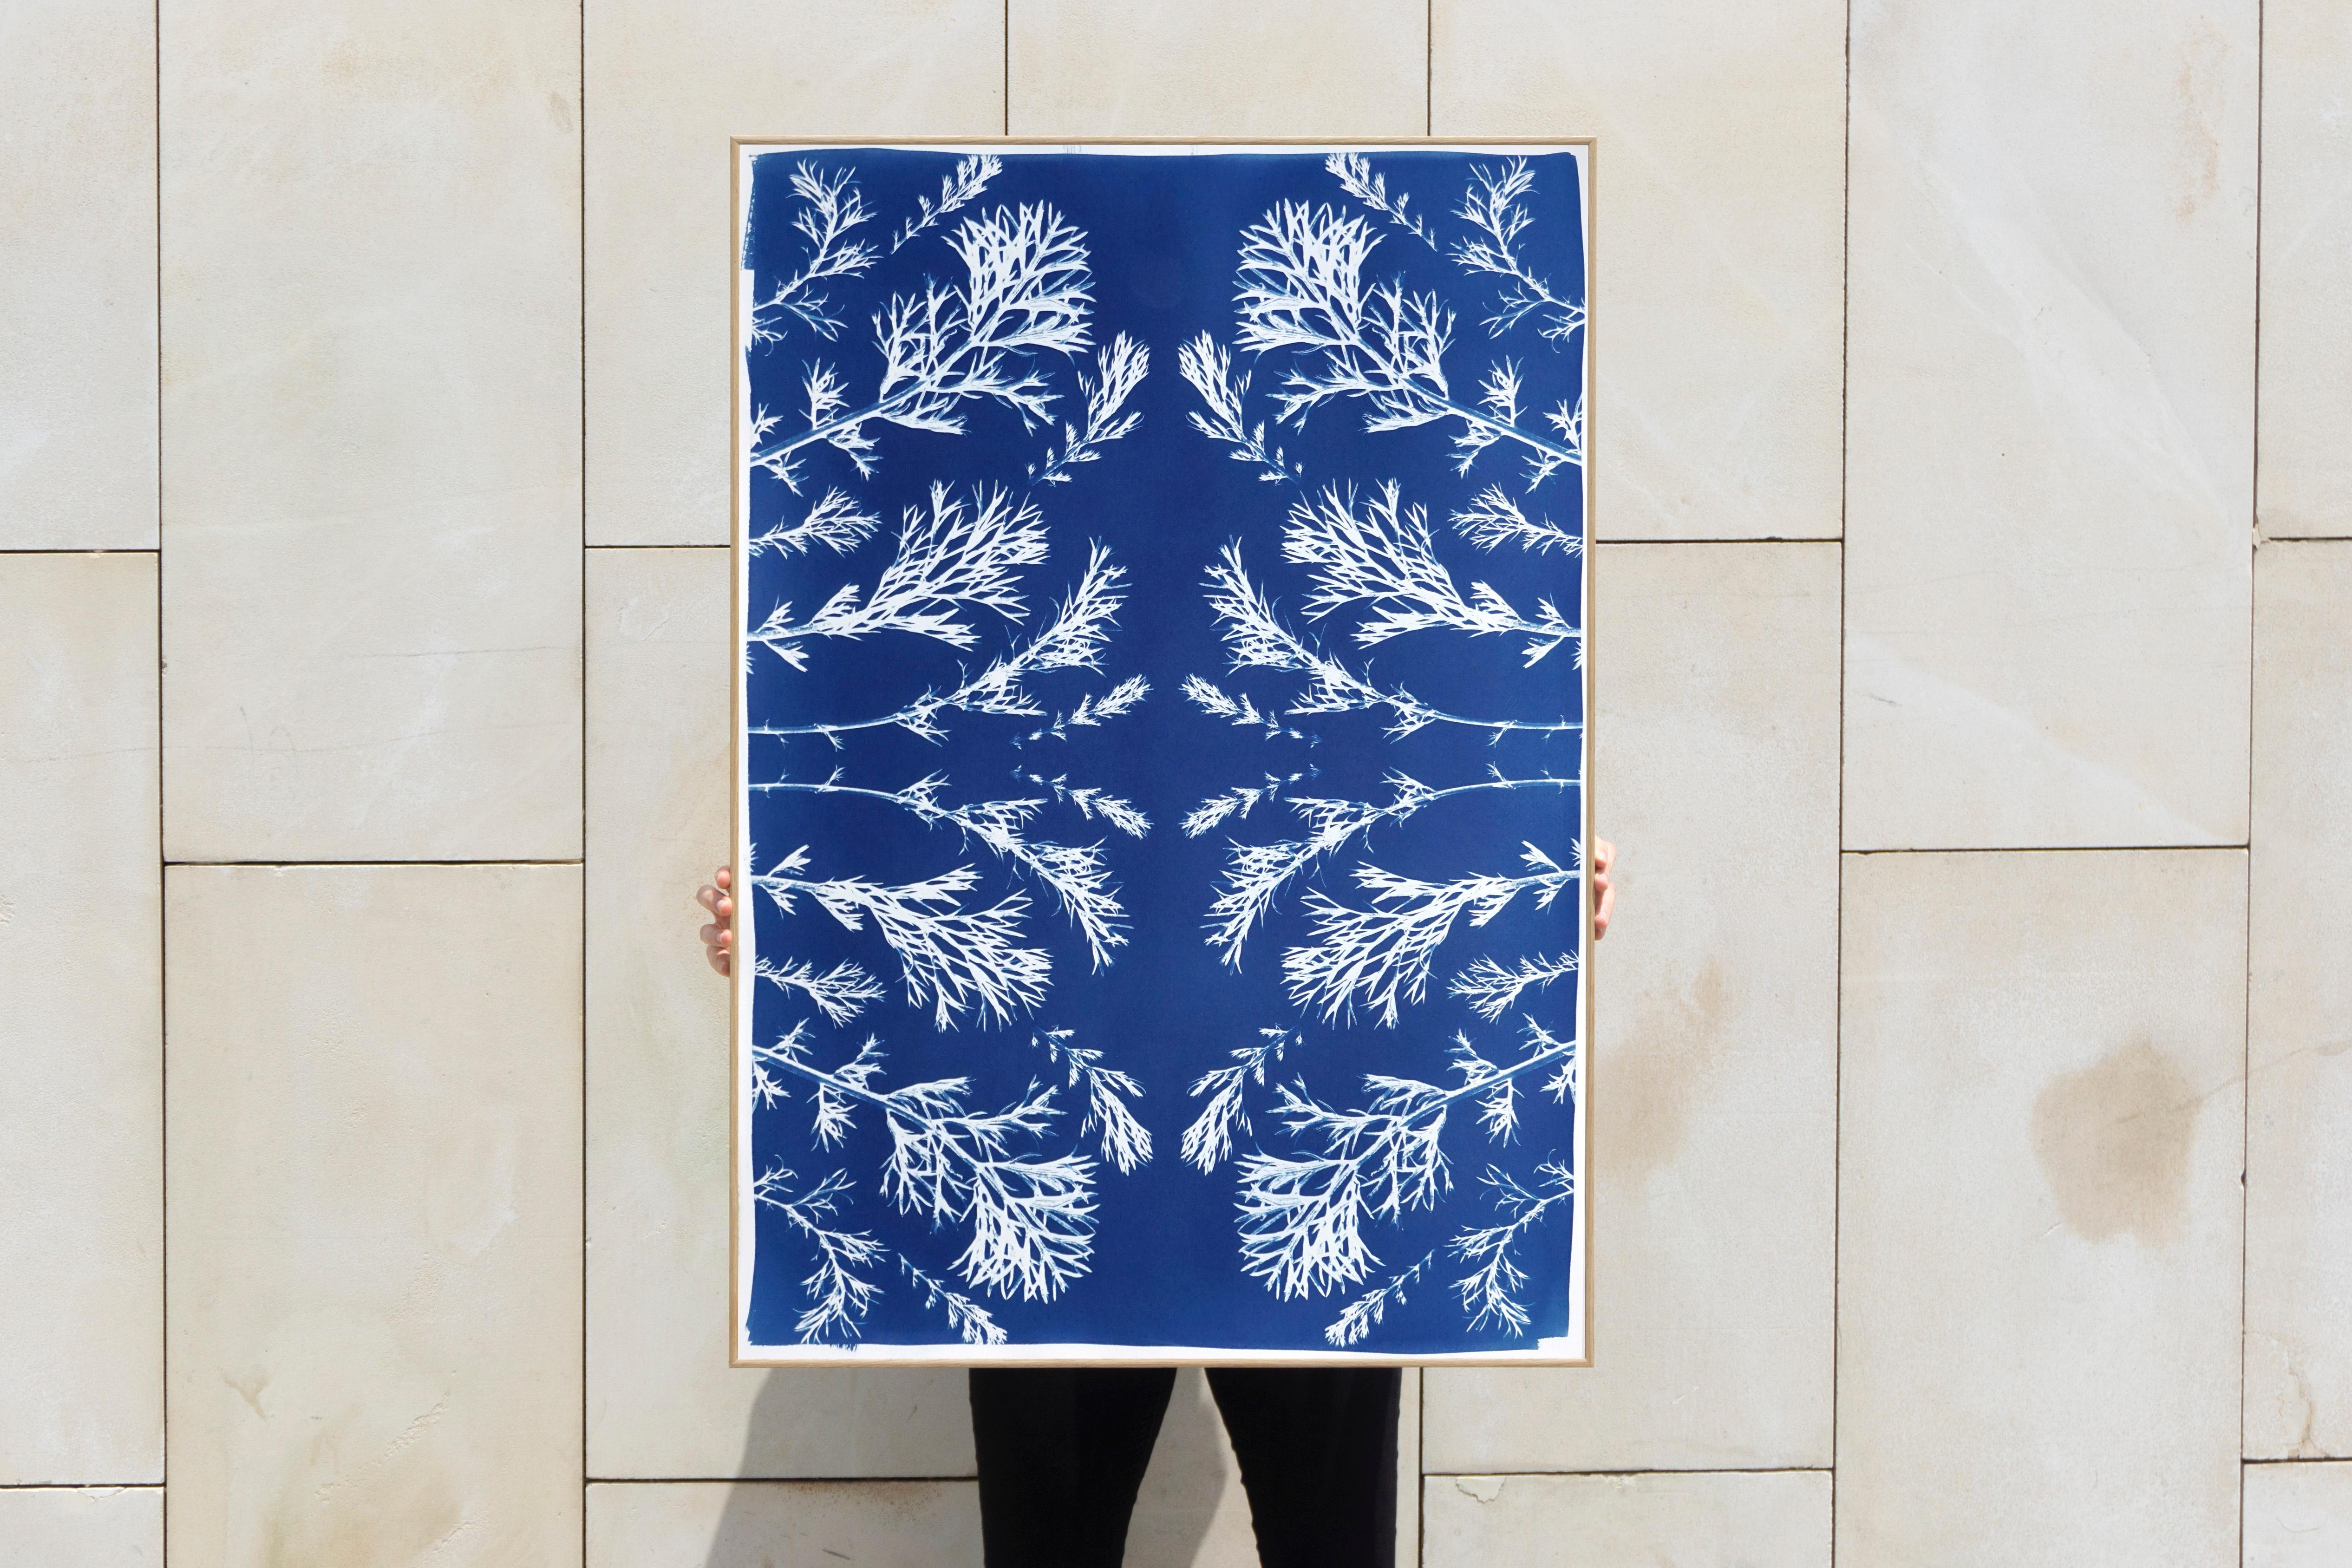 This is an exclusive handprinted limited edition cyanotype.

Details:
+ Title: Vintage Pressed Flowers Nº3
+ Year: 2023
+ Edition Size: 20
+ Stamped and Certificate of Authenticity provided
+ Measurements : 70x100 cm (28x 40 in.), a standard frame